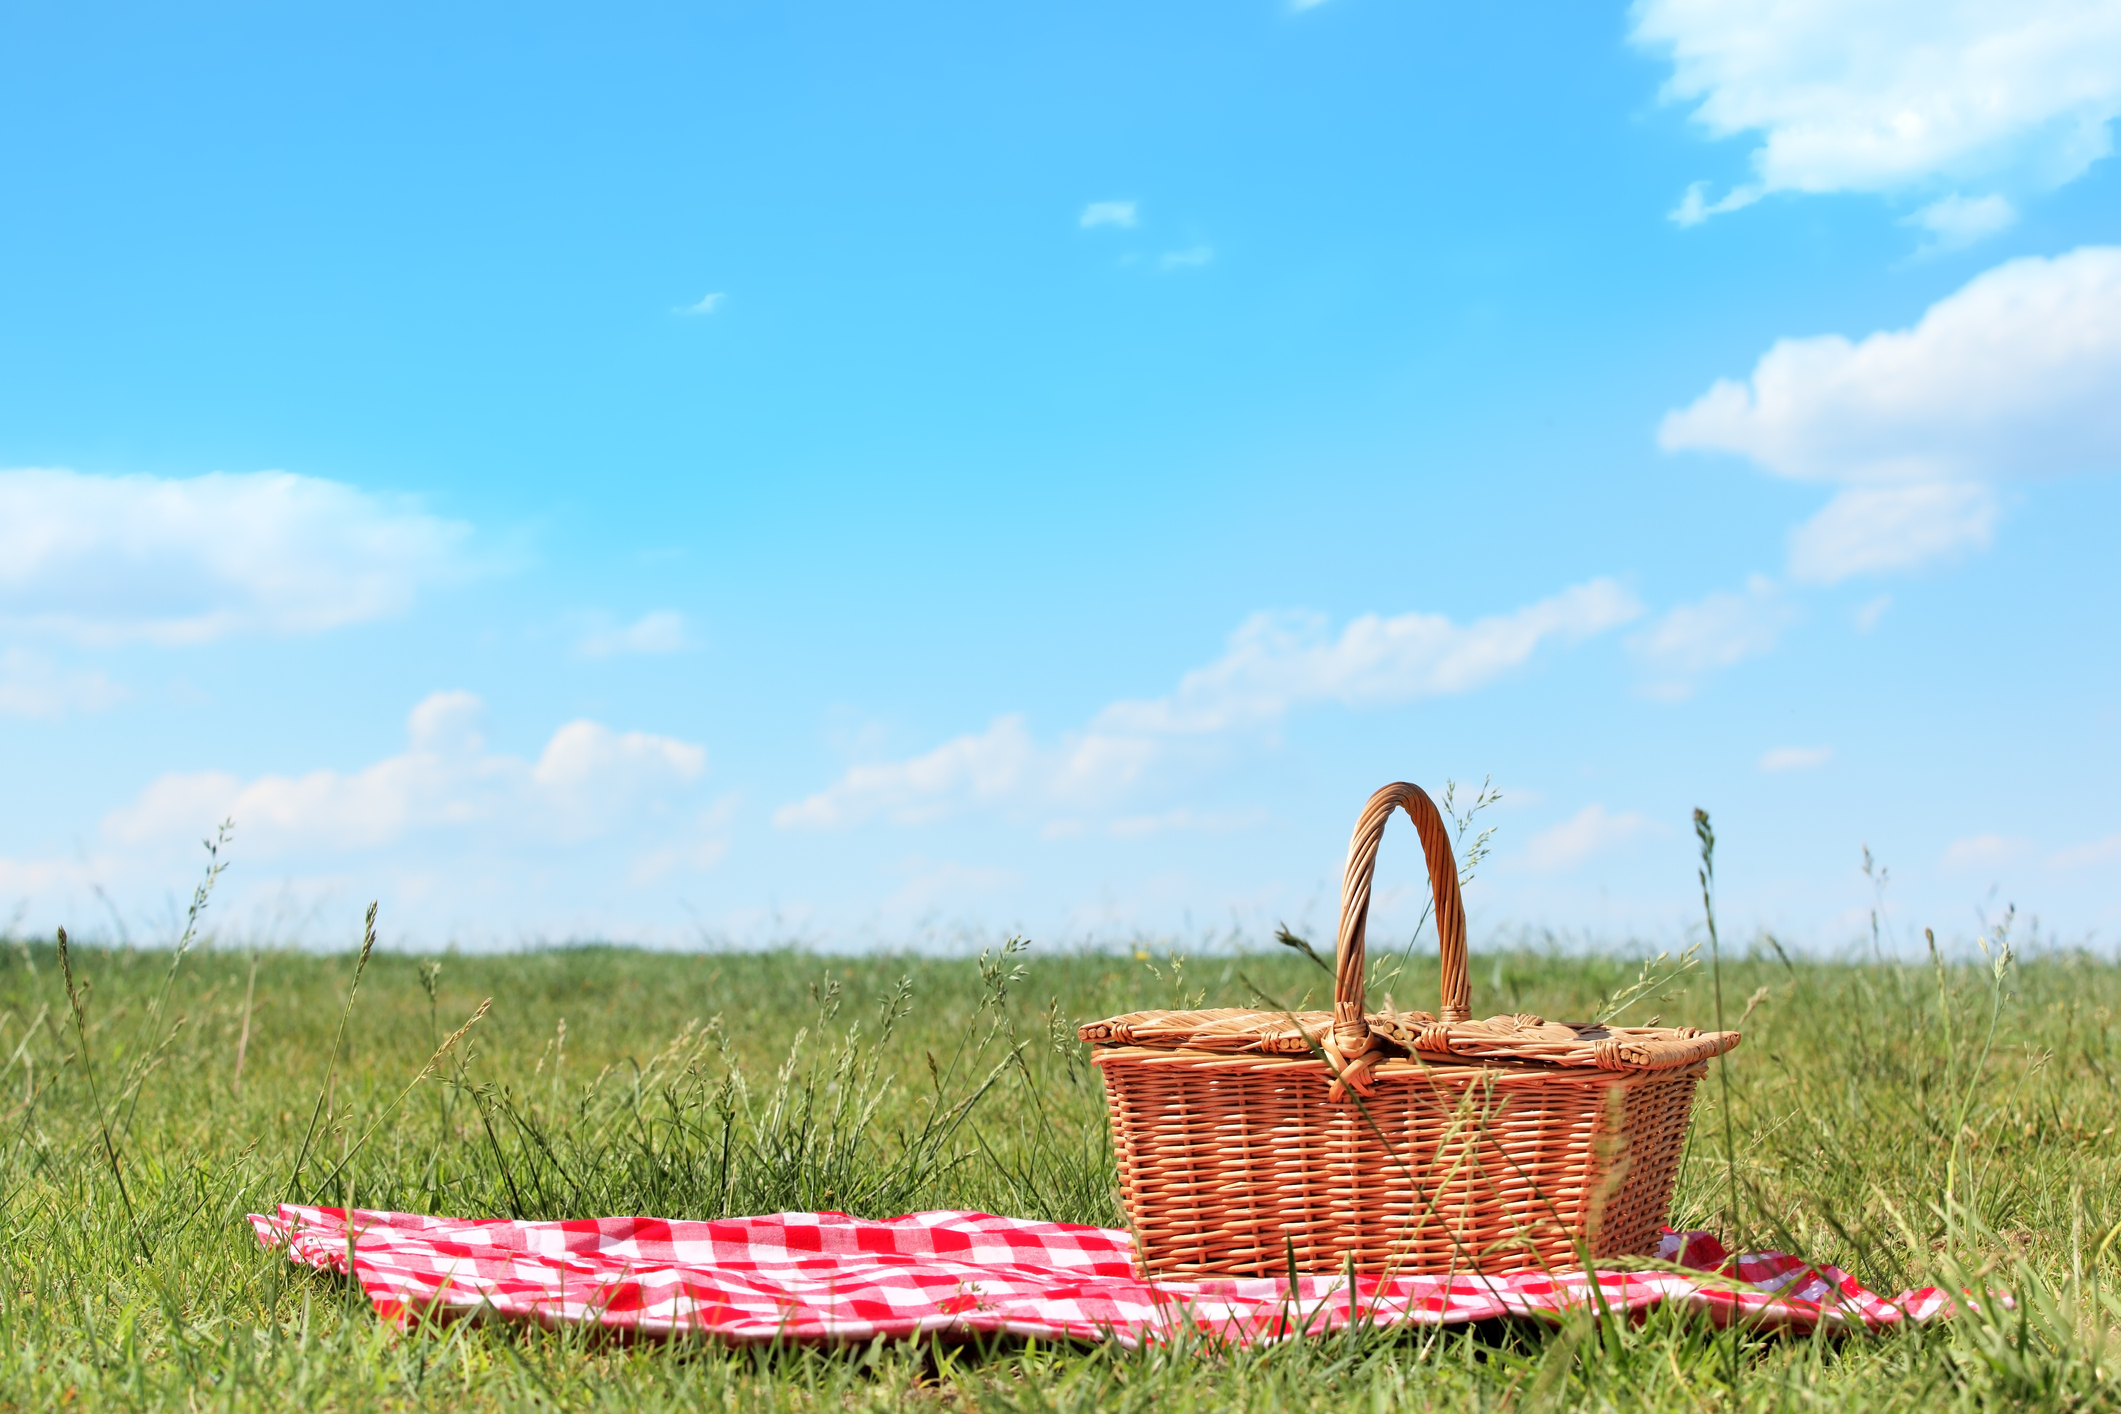 wicker picnic basket on a red and white checked blanket on green grass with a bright blue sky